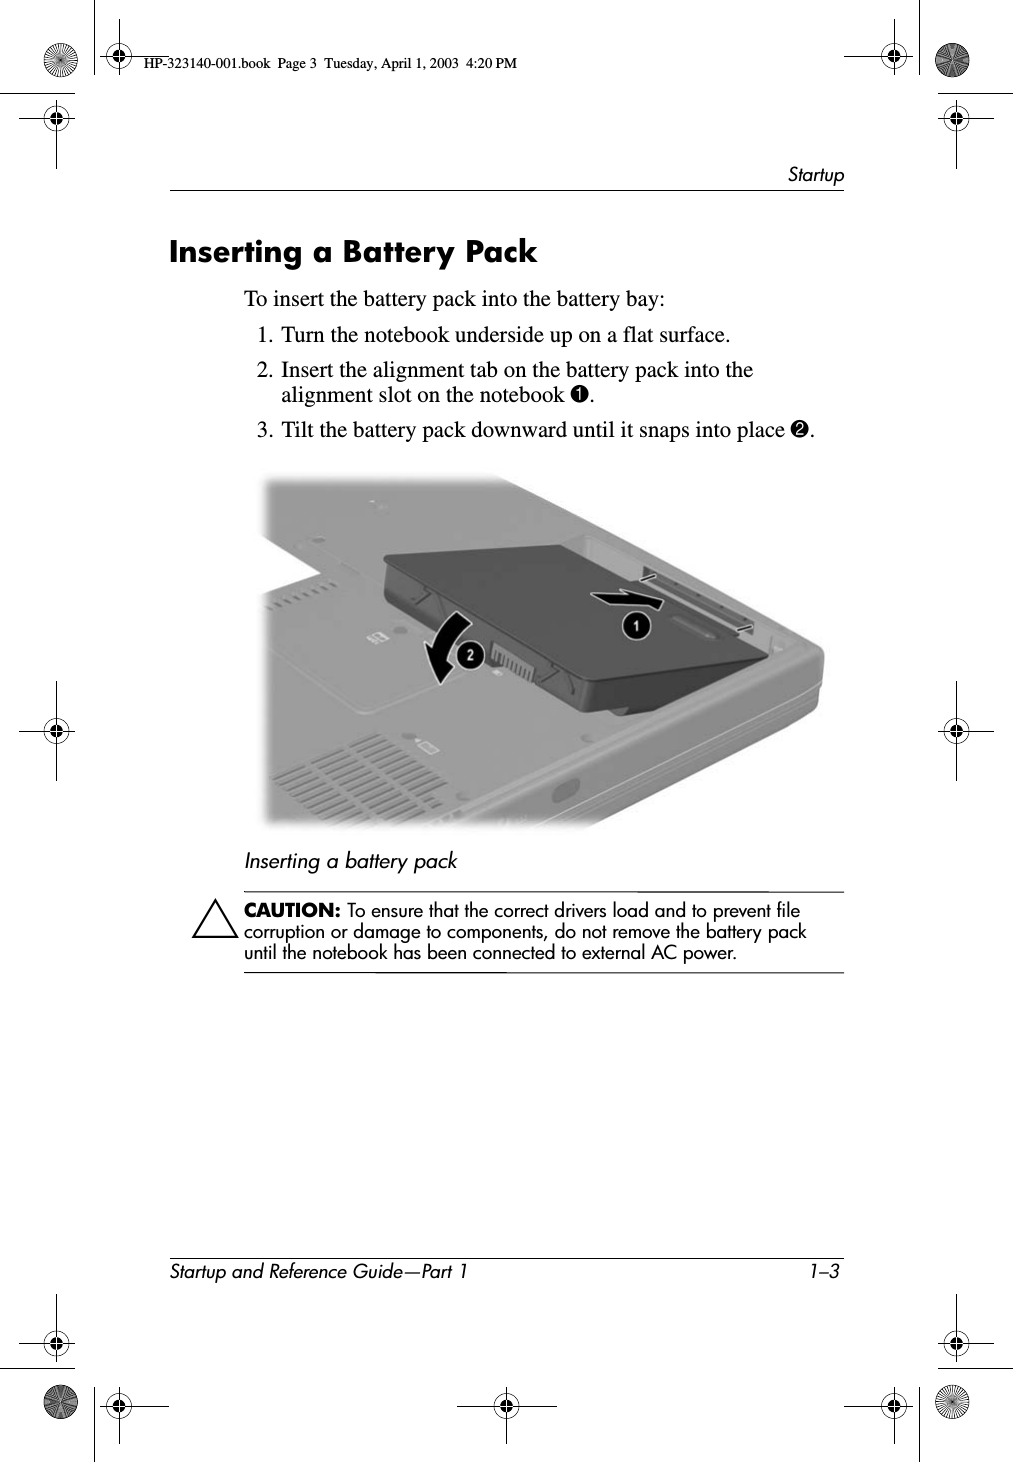 StartupStartup and Reference Guide—Part 1 1–3Inserting a Battery PackTo insert the battery pack into the battery bay:1. Turn the notebook underside up on a flat surface.2. Insert the alignment tab on the battery pack into the alignment slot on the notebook 1.3. Tilt the battery pack downward until it snaps into place 2.Inserting a battery packÄCAUTION: To ensure that the correct drivers load and to prevent file corruption or damage to components, do not remove the battery pack until the notebook has been connected to external AC power.HP-323140-001.book  Page 3  Tuesday, April 1, 2003  4:20 PM